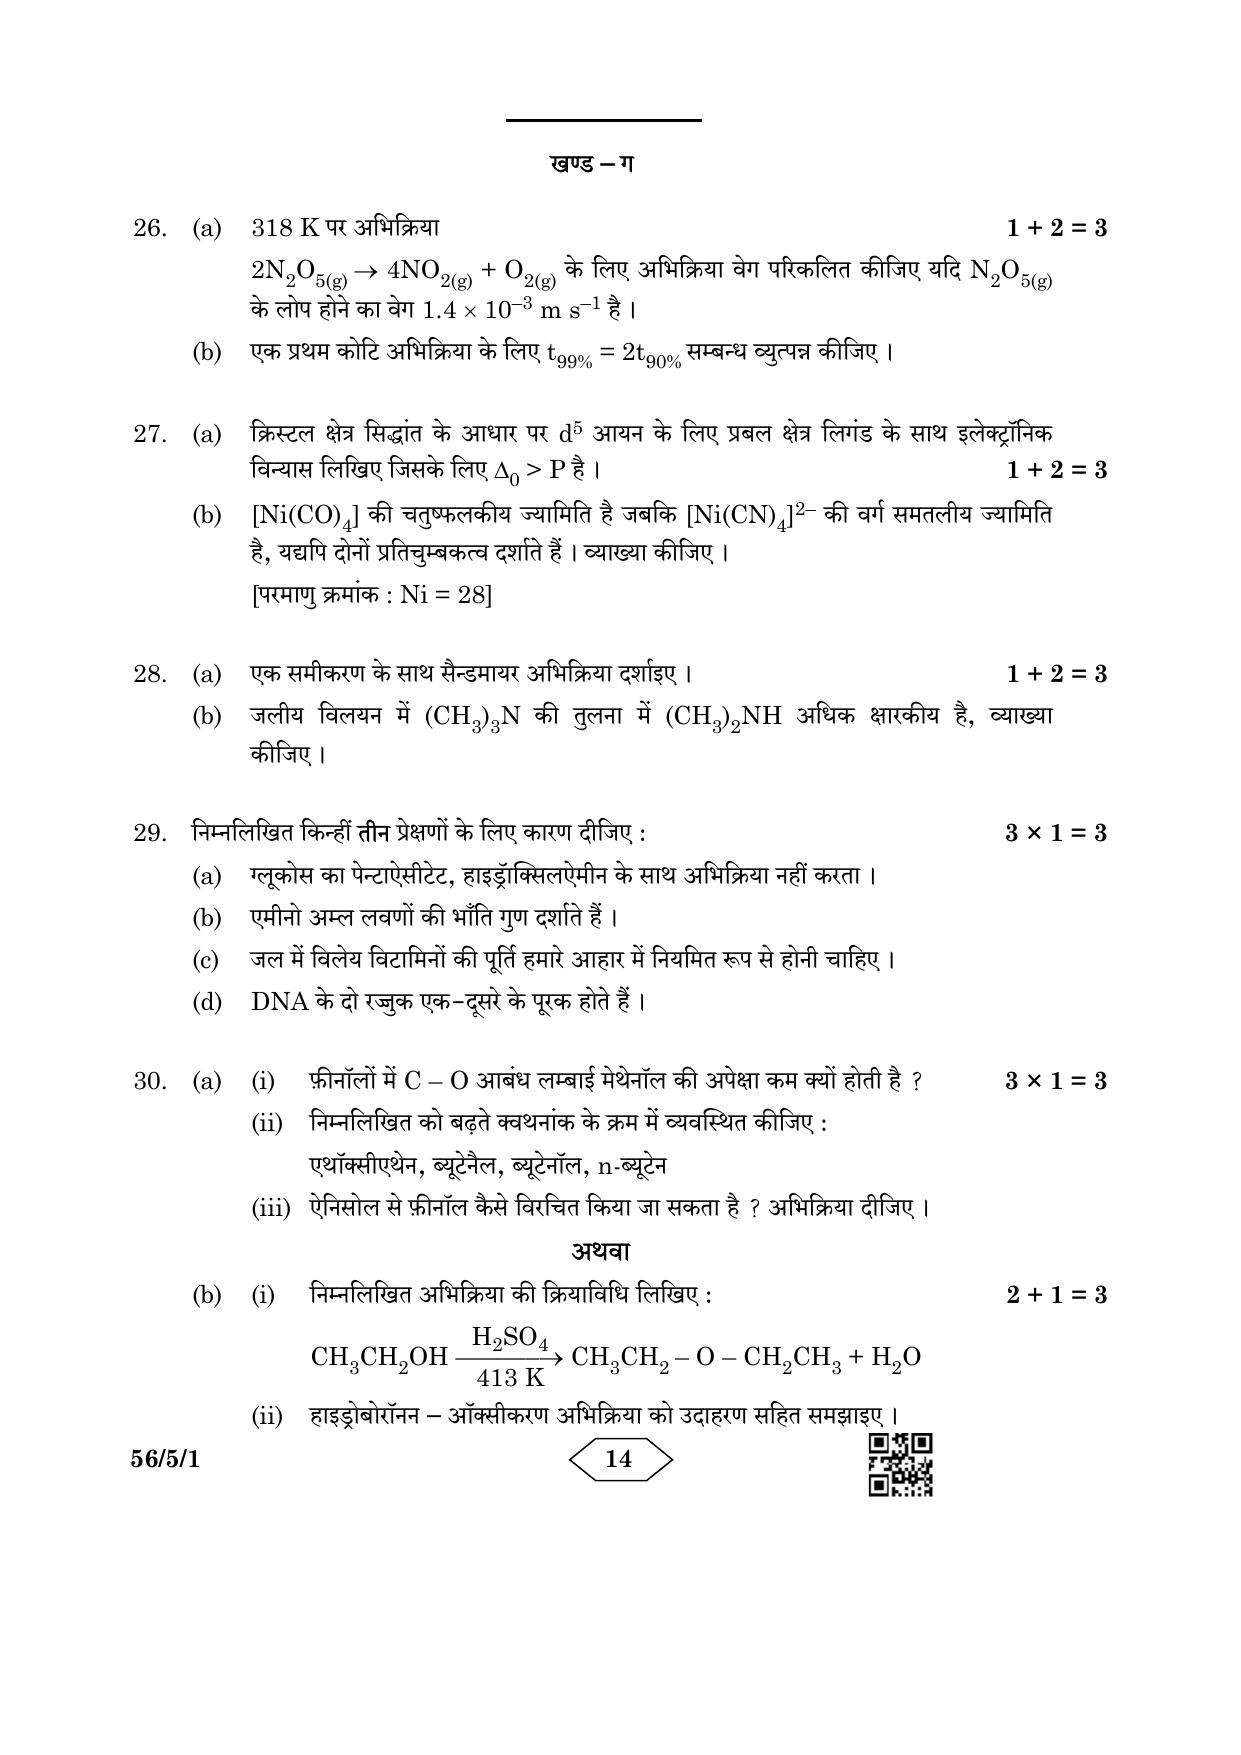 CBSE Class 12 56-5-1 Chemistry 2023 Question Paper - Page 14